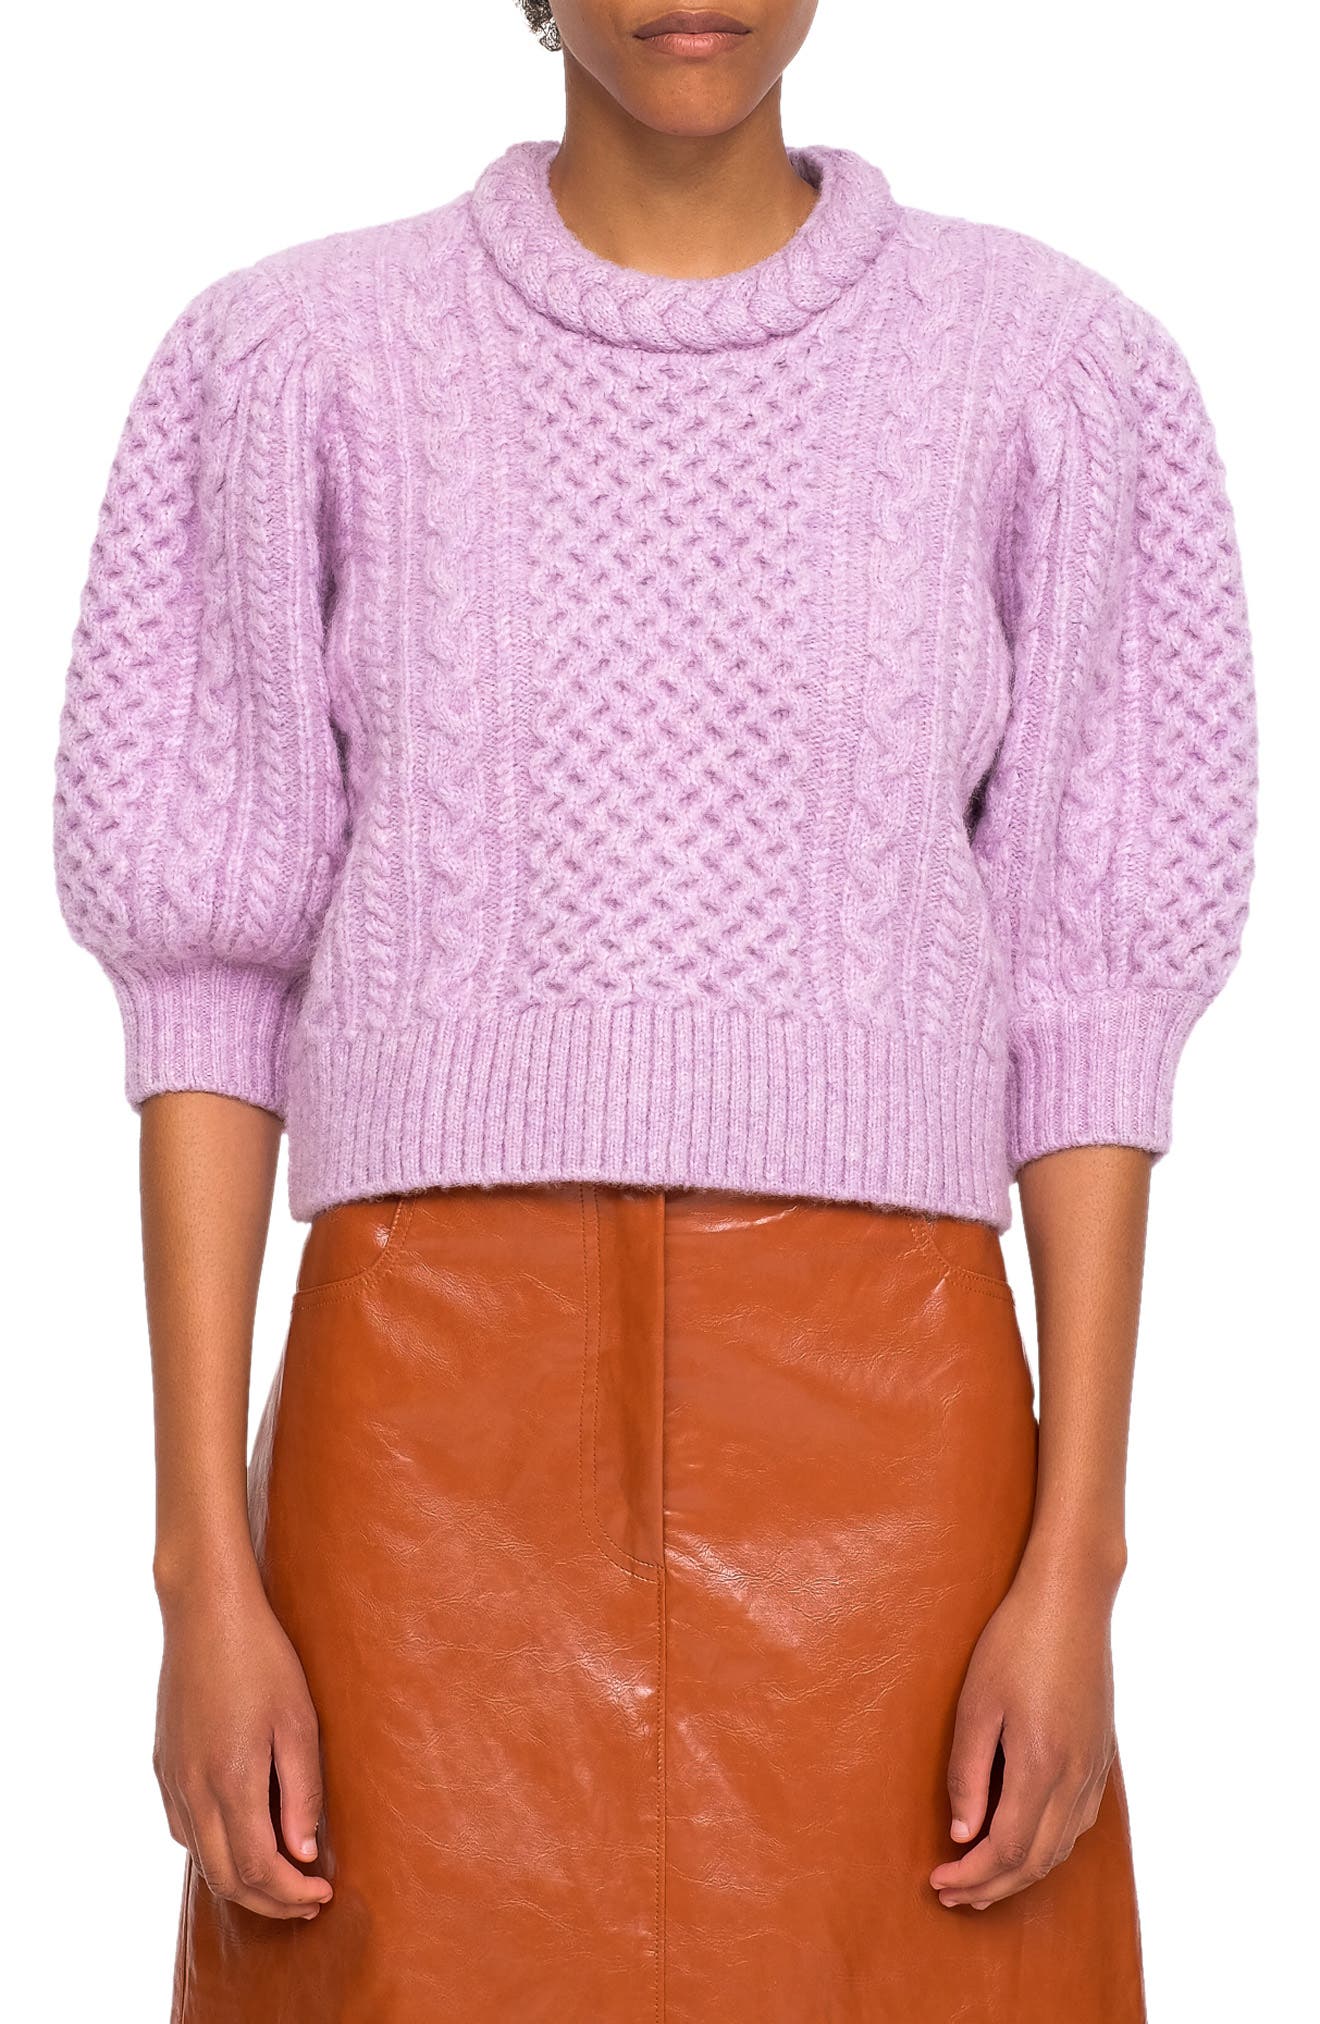 Sea Ebba Puff Sleeve Cable Knit Merino Wool Blend Sweater in Lilac at Nordstrom